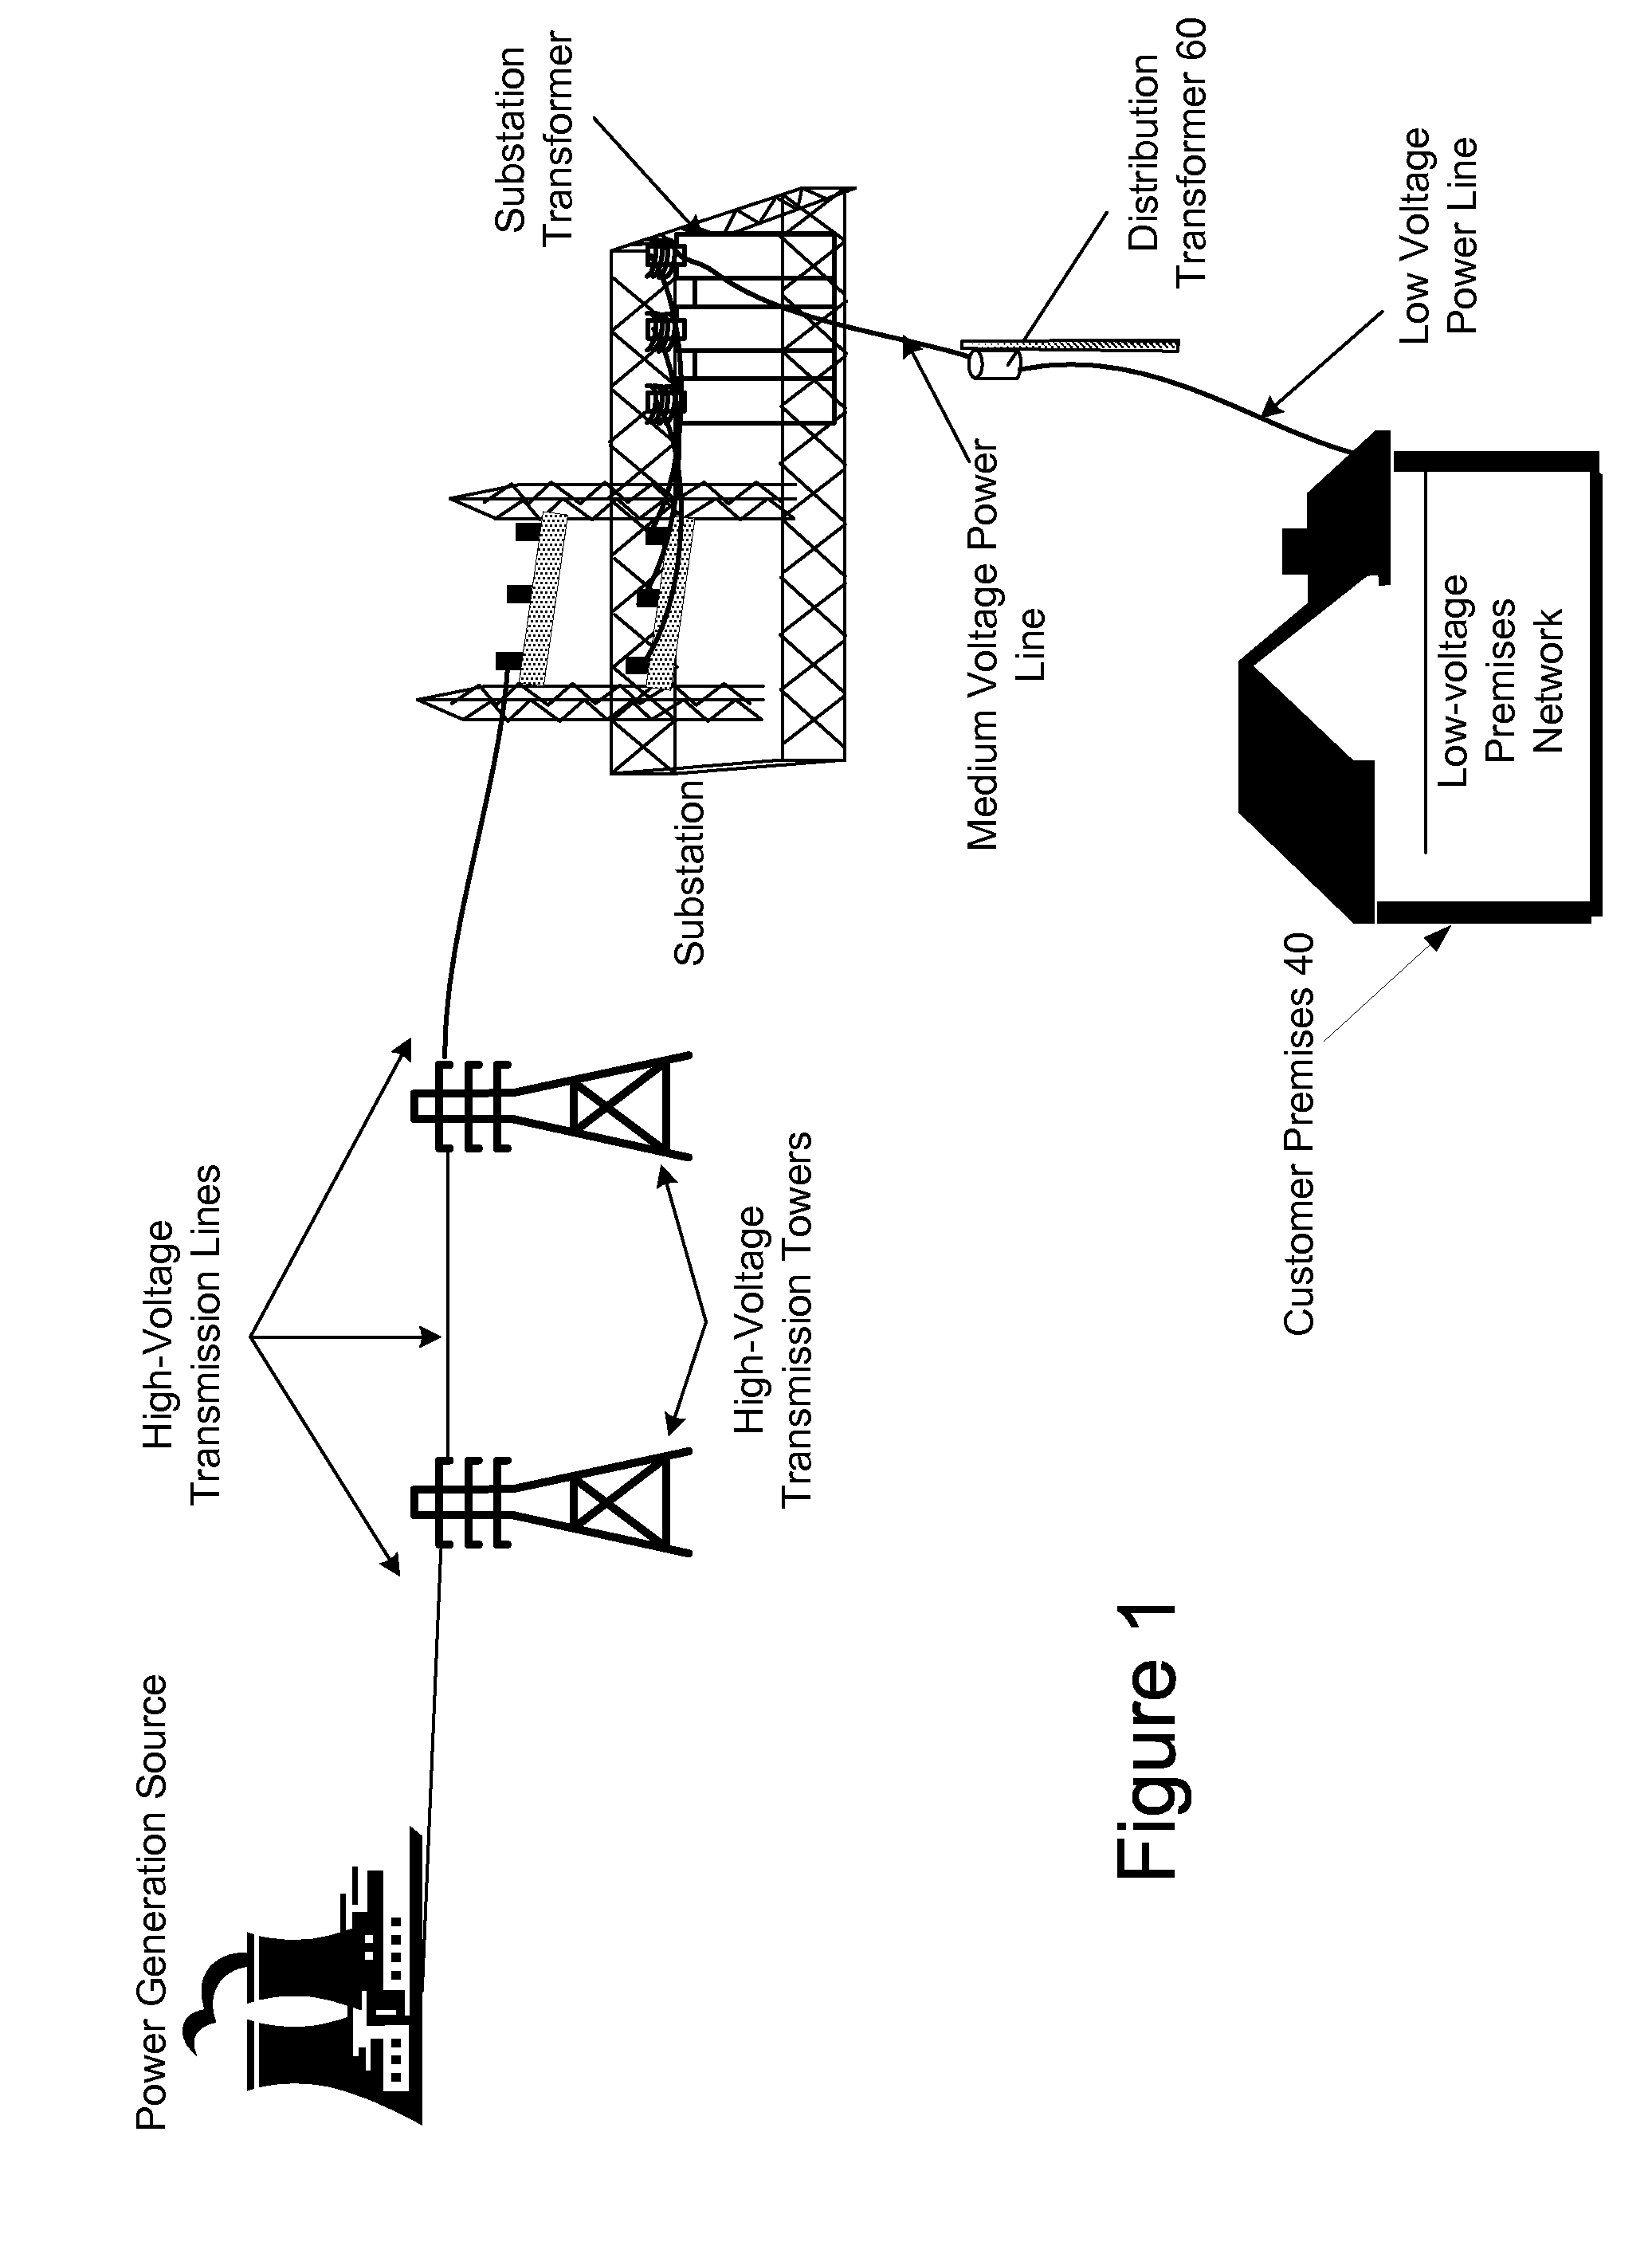 Power Line Communications System and Method